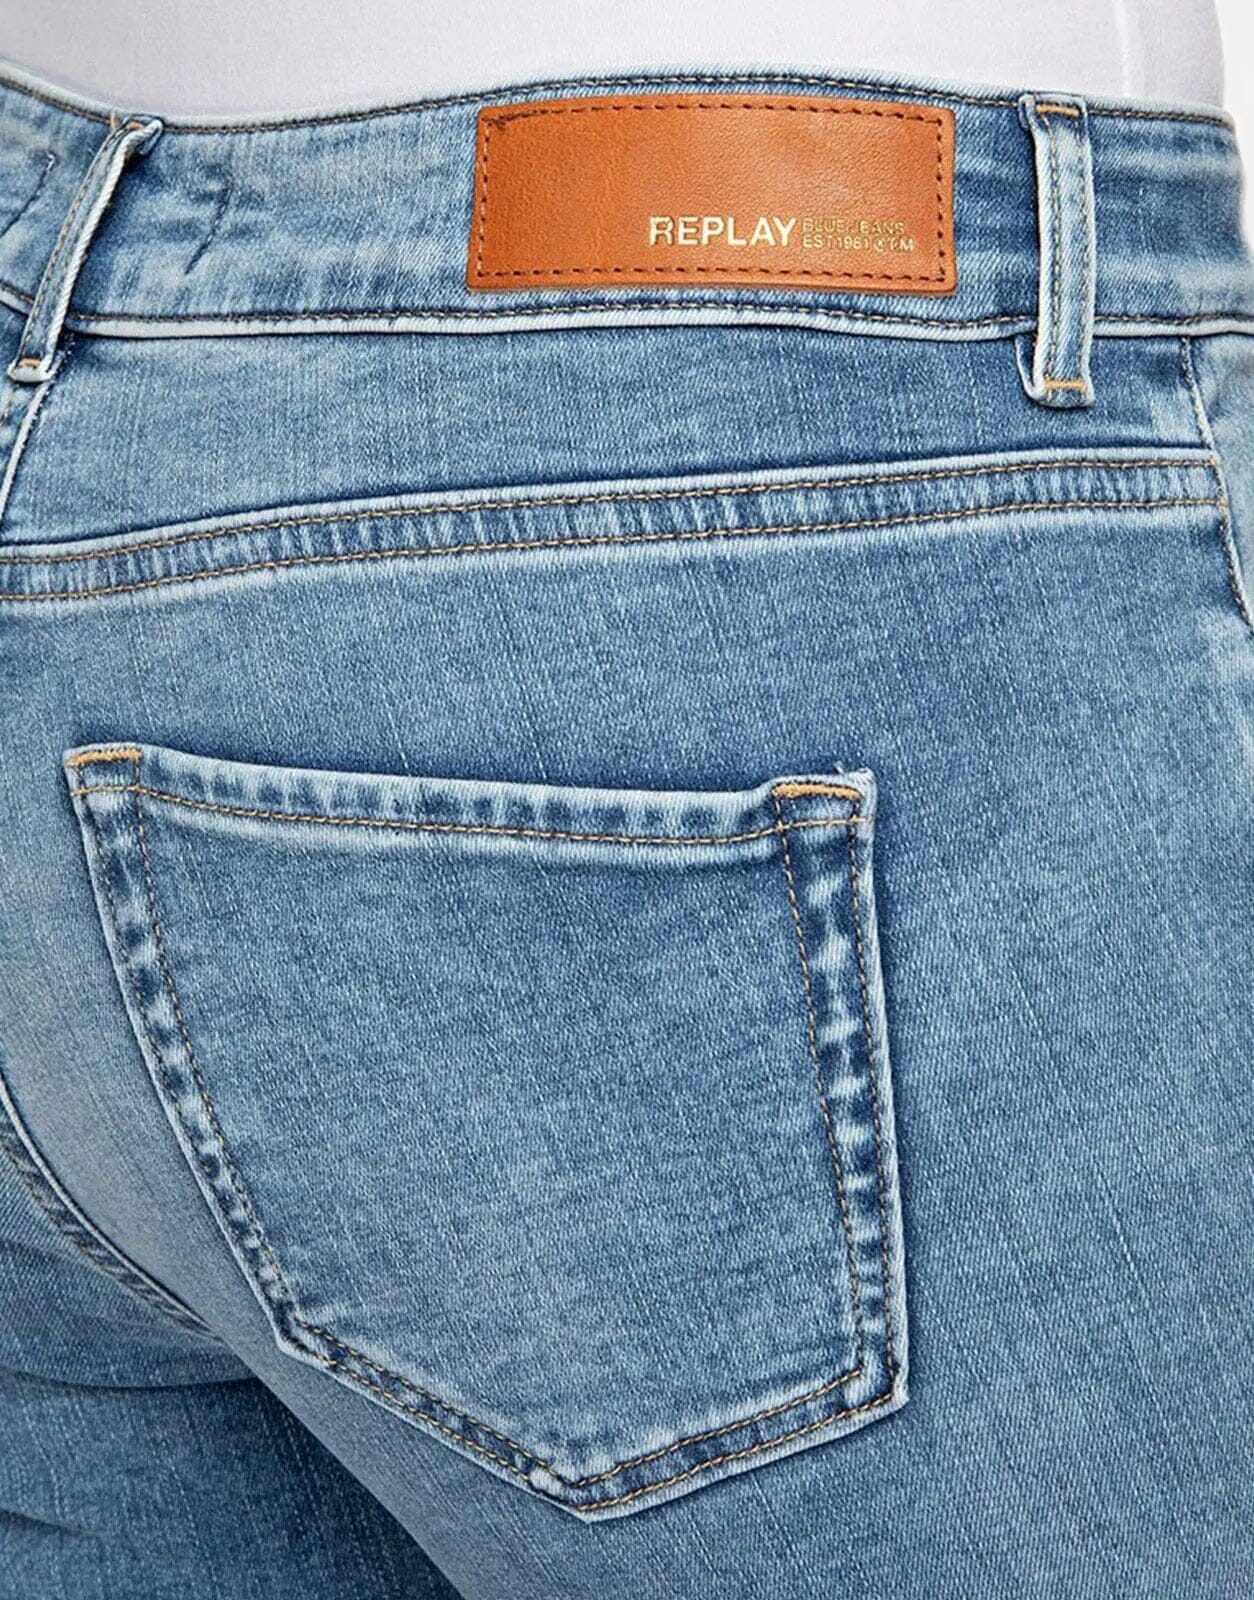 Replay Faaby Jeans - Subwear